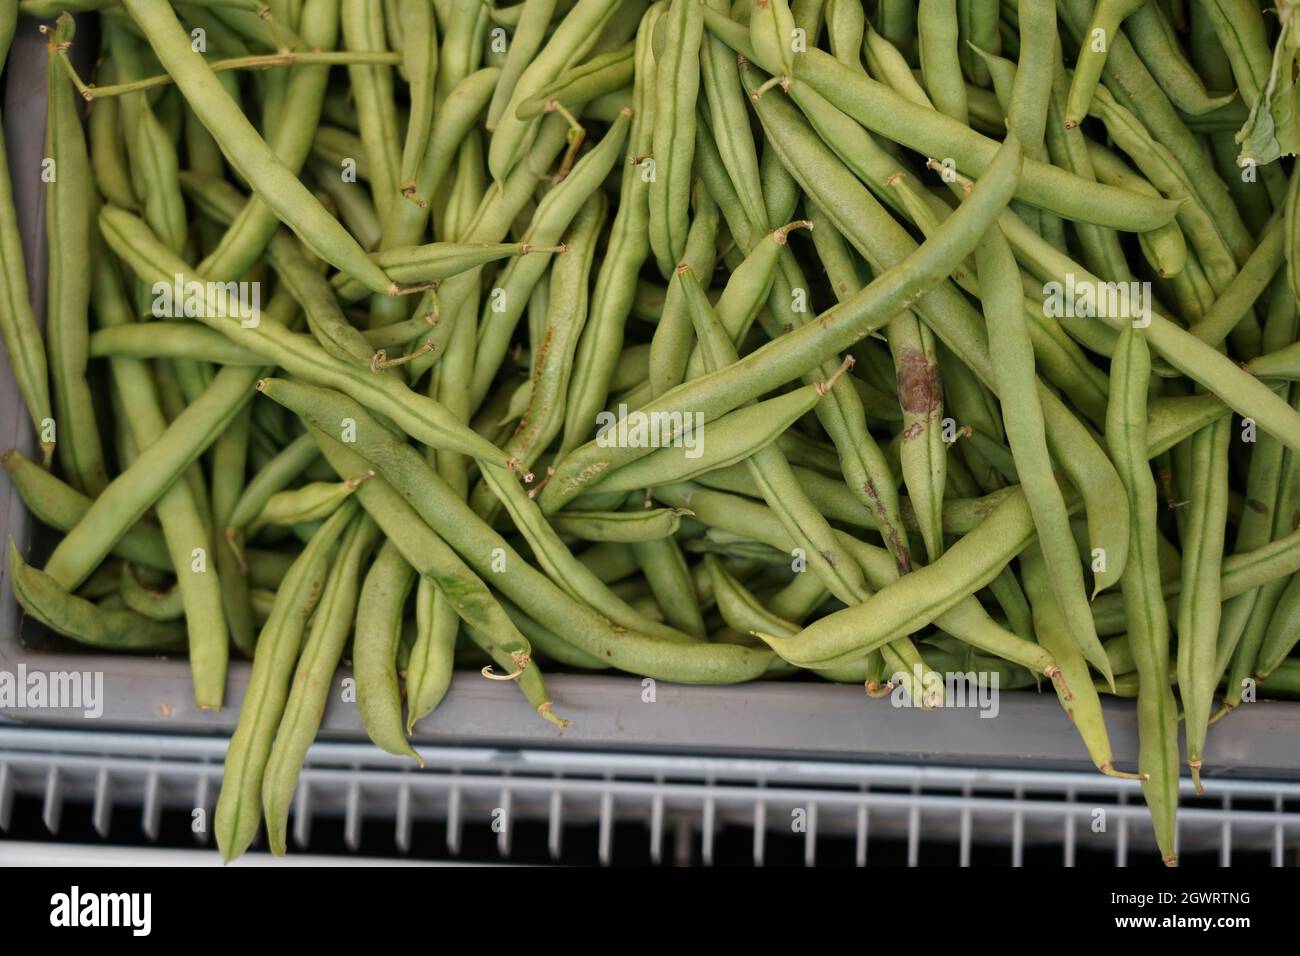 Green Beans For Sale In Supermarket Stock Photo